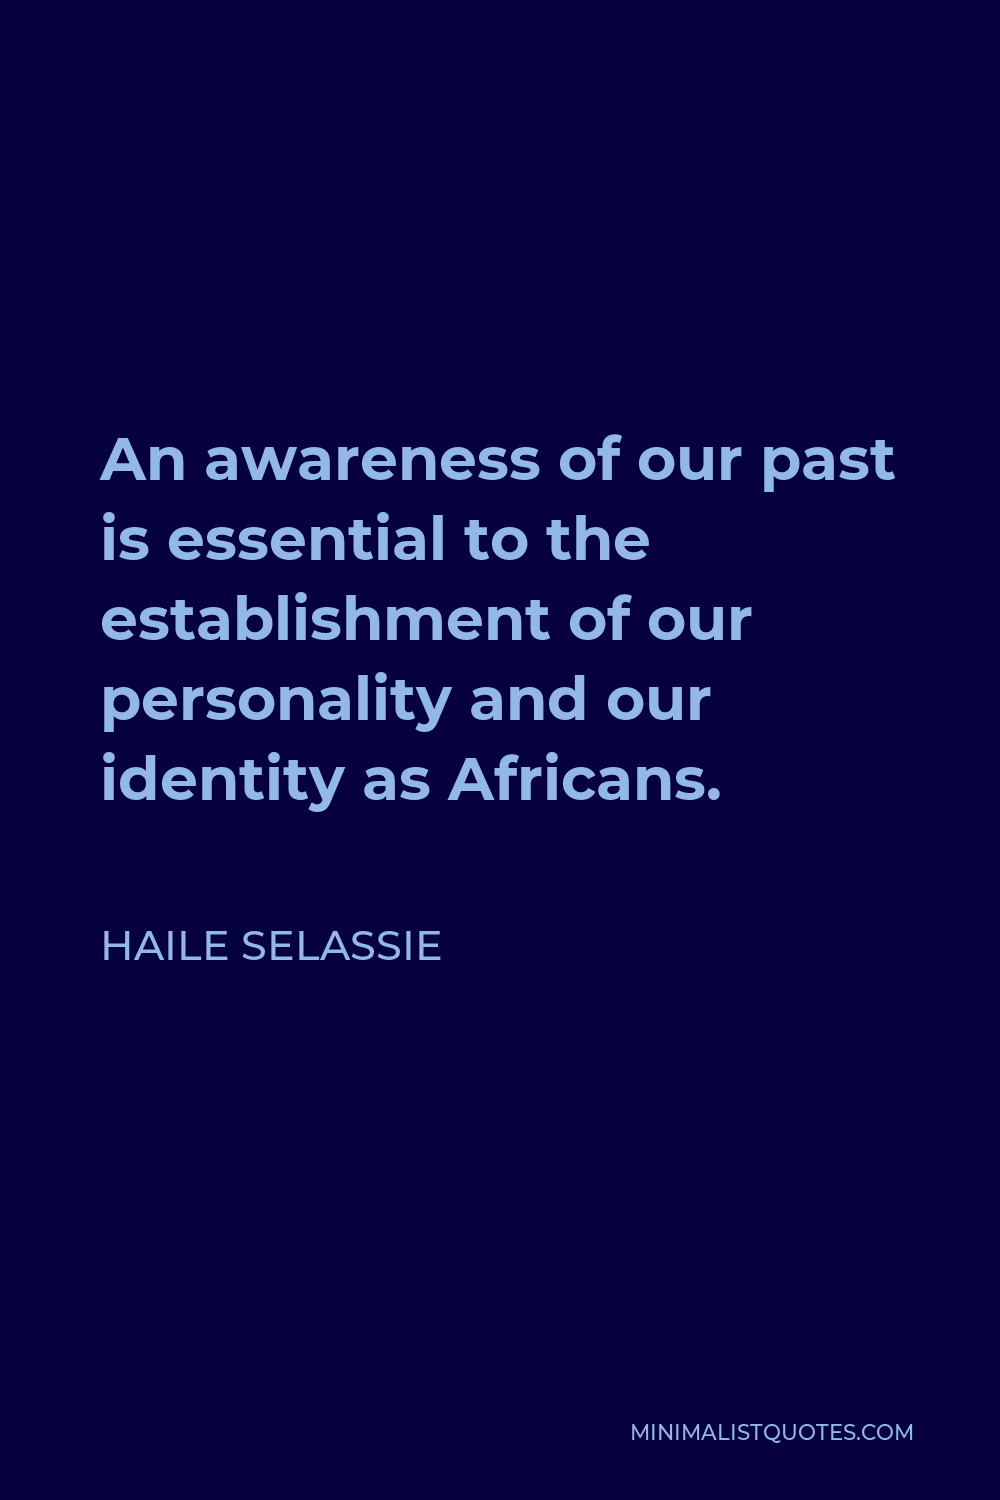 Haile Selassie Quote - An awareness of our past is essential to the establishment of our personality and our identity as Africans.